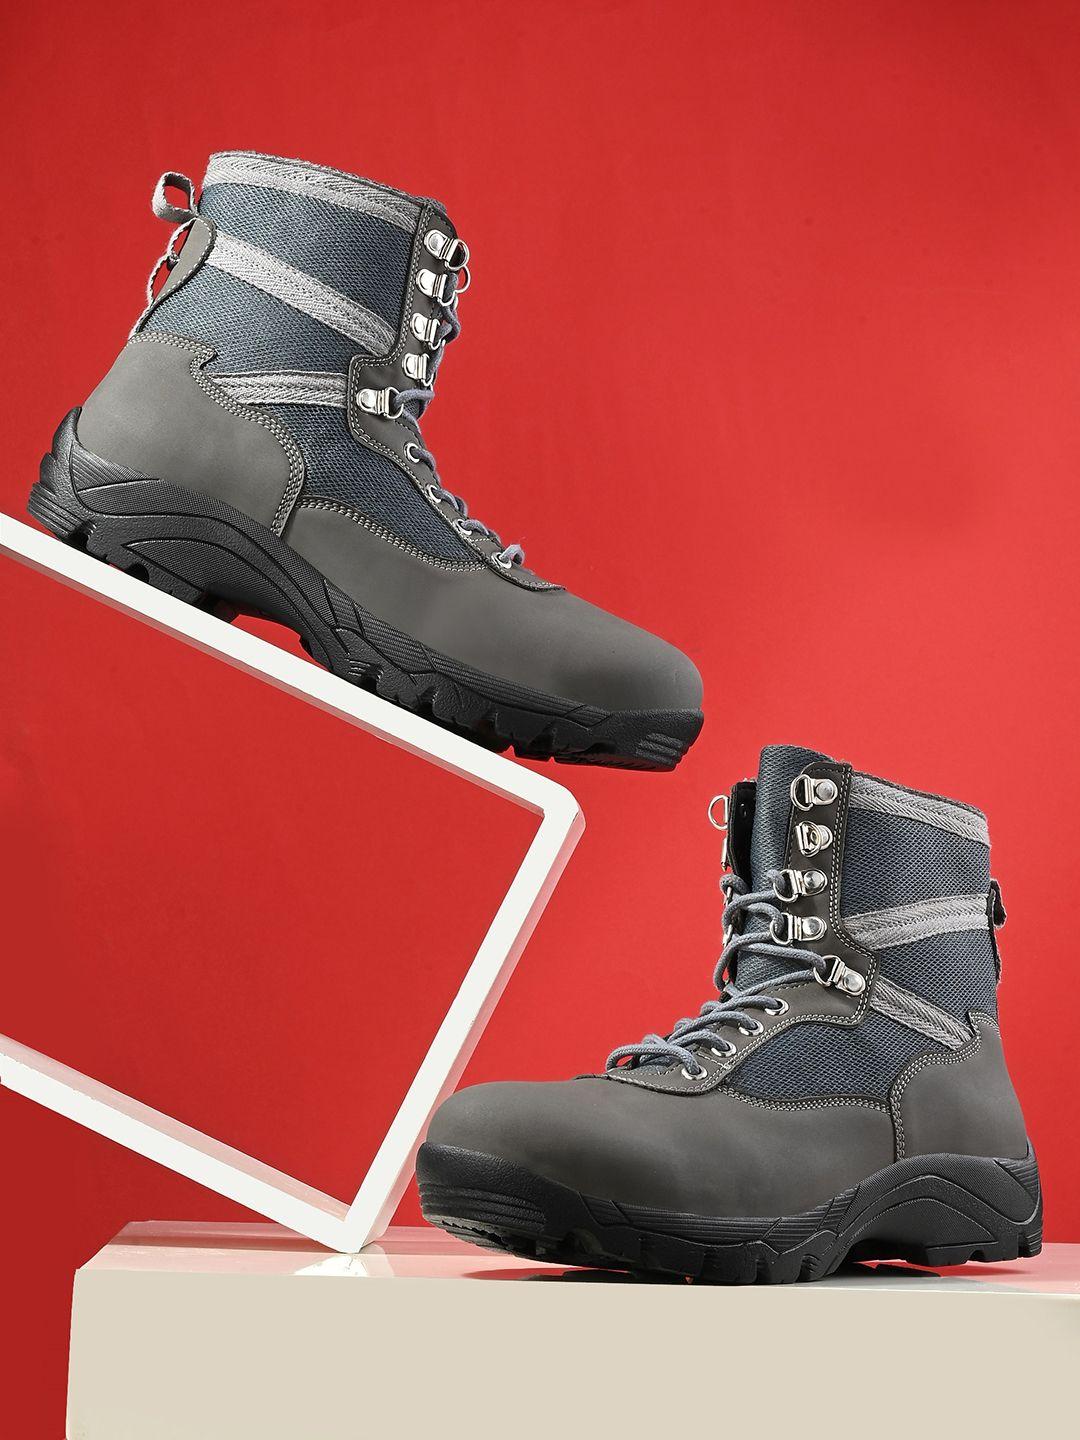 the roadster lifestyle co. men high-top biker boots